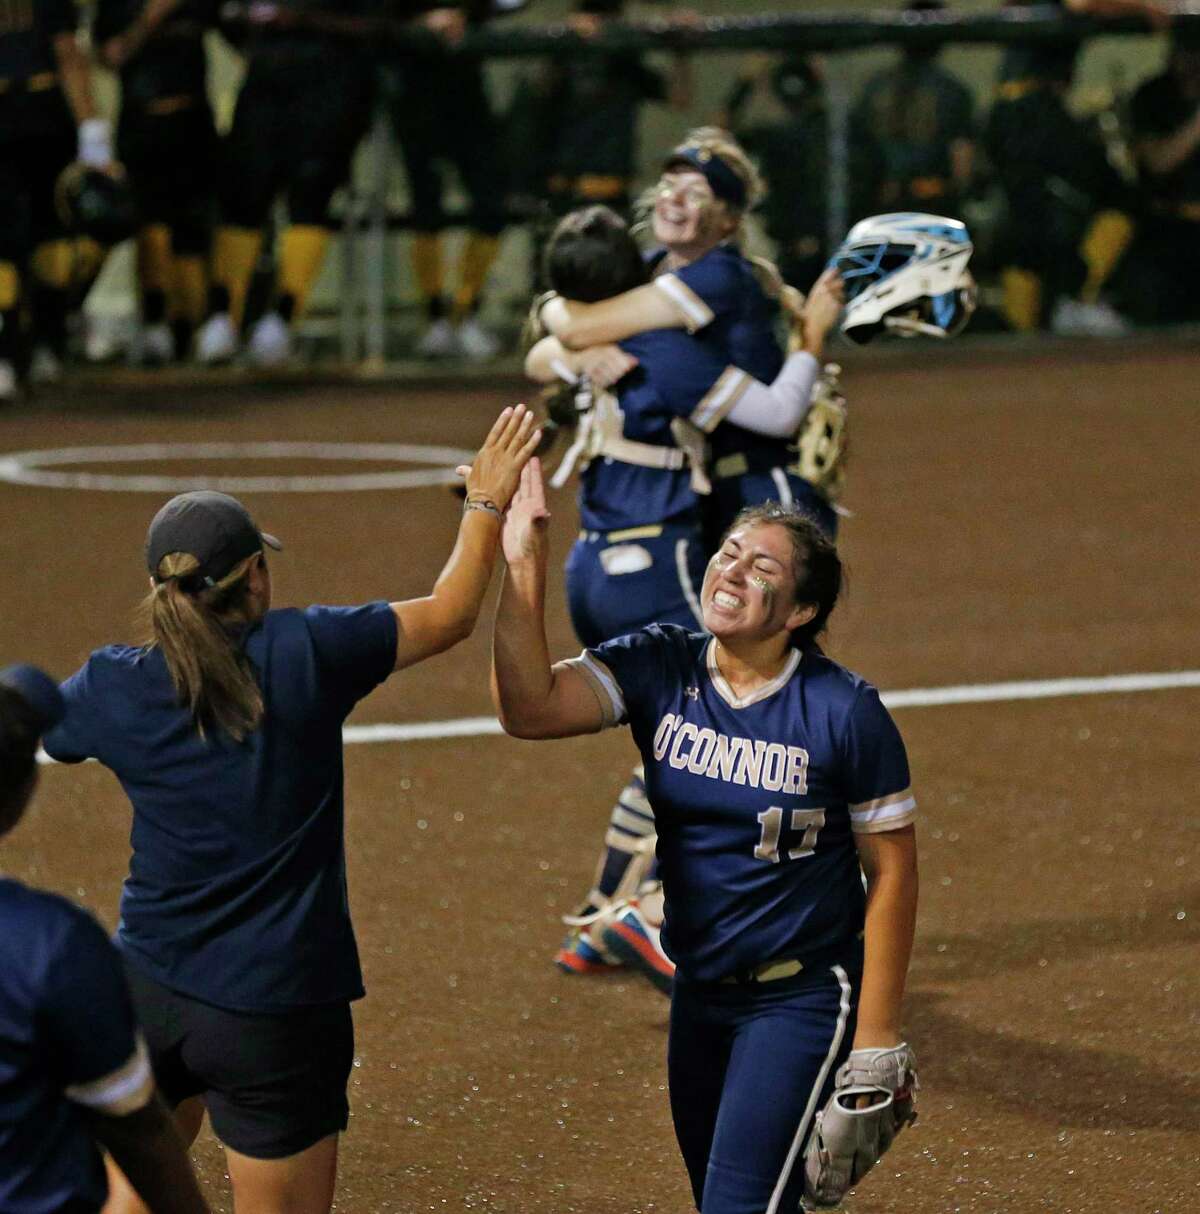 O’Connor pitcher Sammie Portillo (17) celebrates after striking out the last batter to end the game In a 6A Regional IV quarterfinals High School Softball as O'Connor defeated Brennan 12-3 at Northside Field on Friday, May 13, 2022.